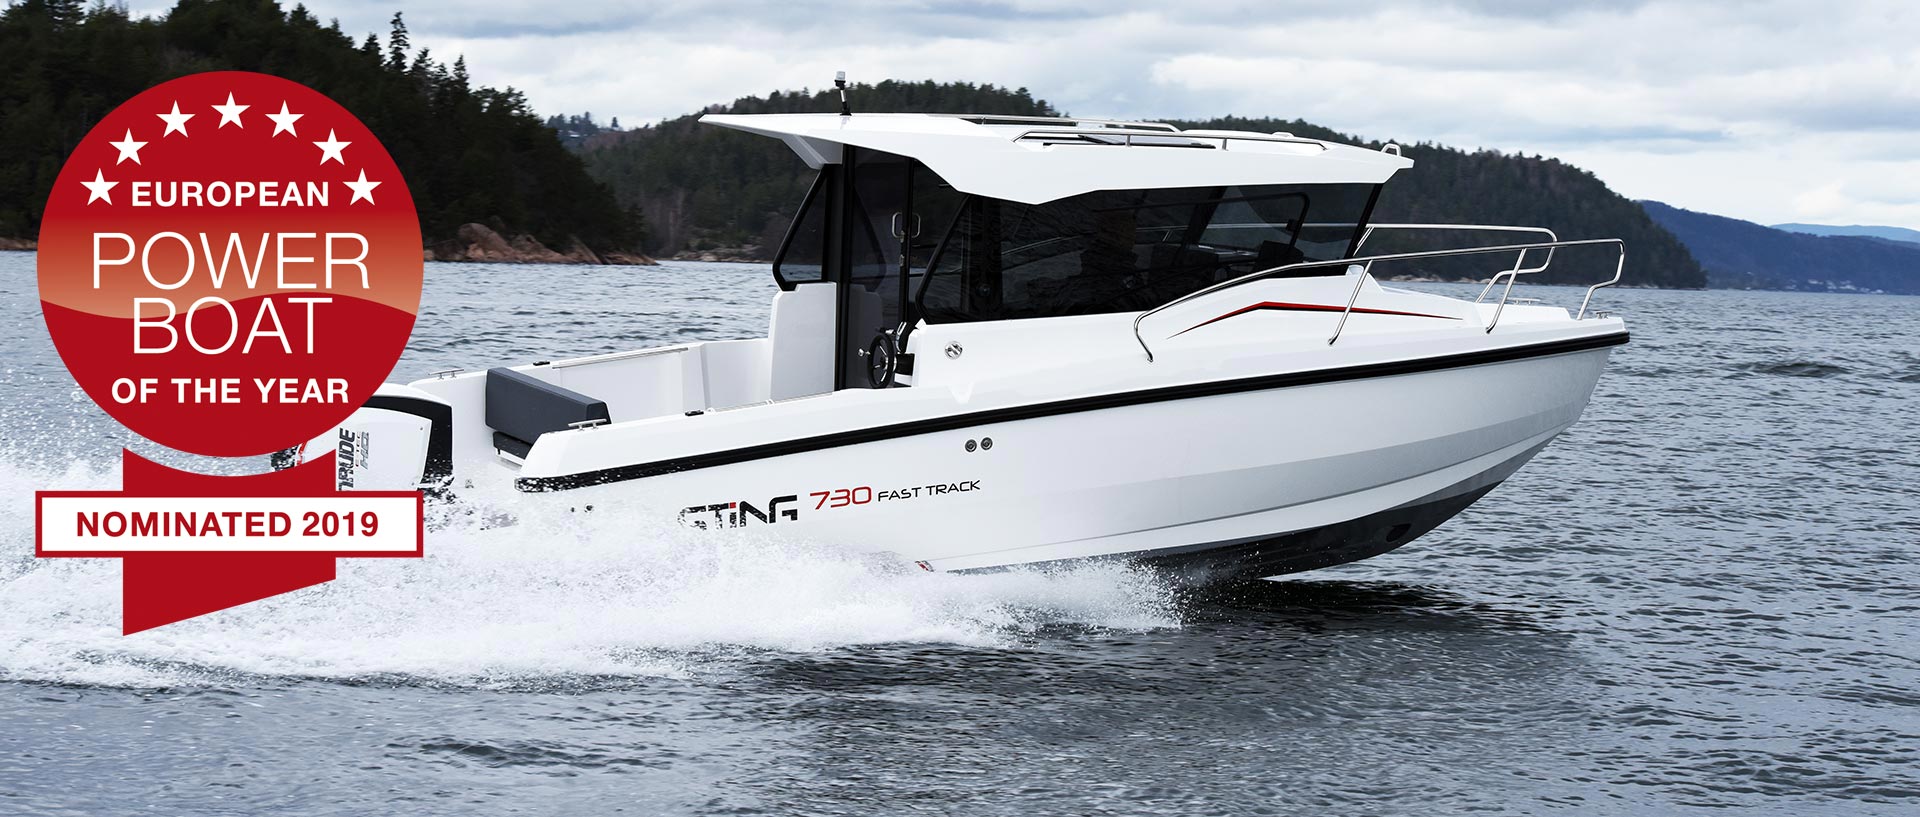 kater-sting-730-fast-track-powerboat-2019